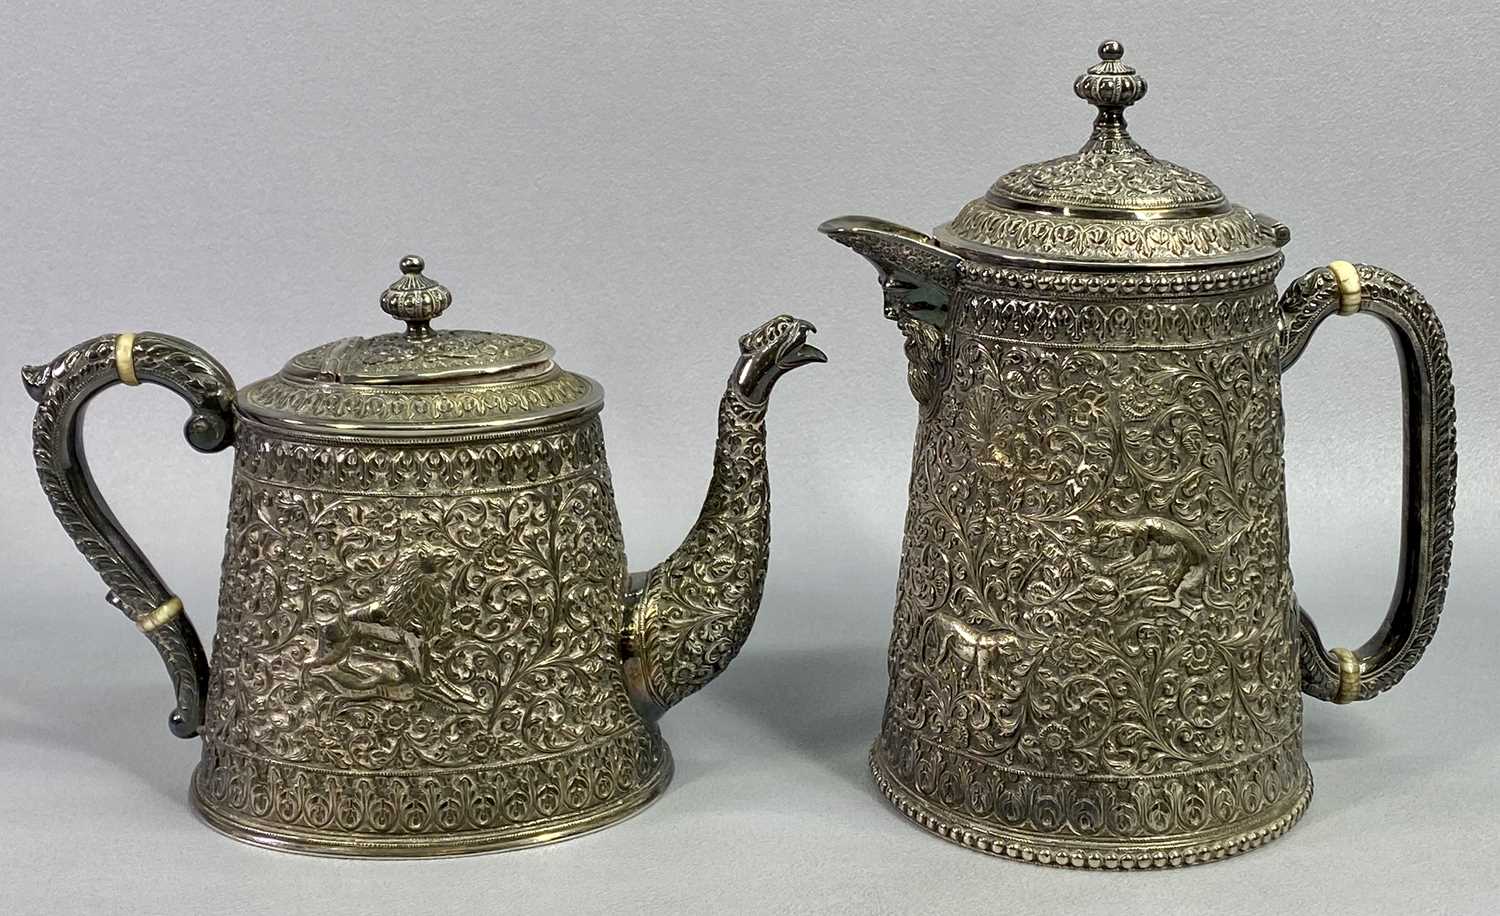 BURMESE STYLE WHITE METAL TEAPOT - repousse chased design with animals hunting, scrolls and flowers, - Image 3 of 5